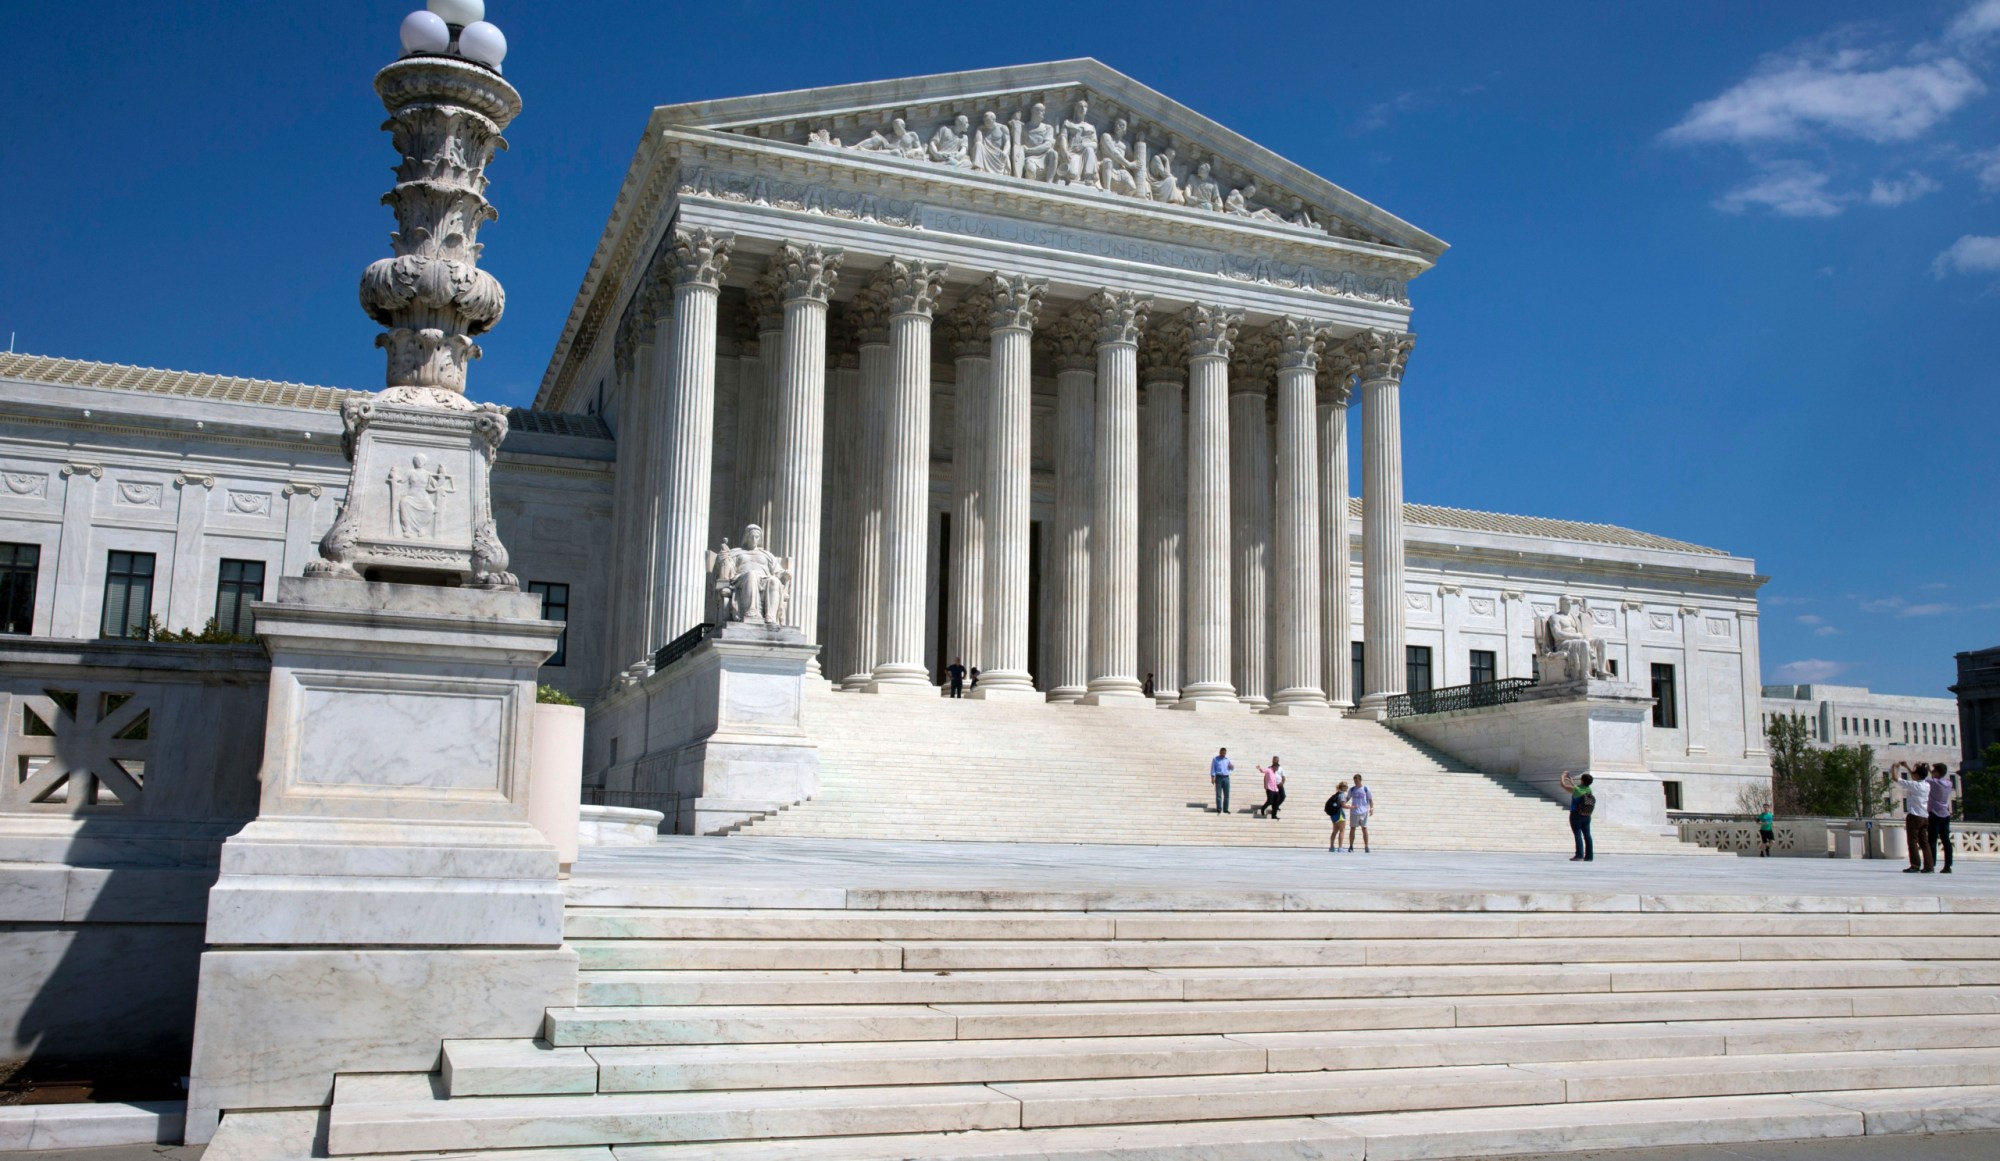 People walk on the steps of the U.S. Supreme Court in Washington, D.C. (AP Photo/Jacquelyn Martin)